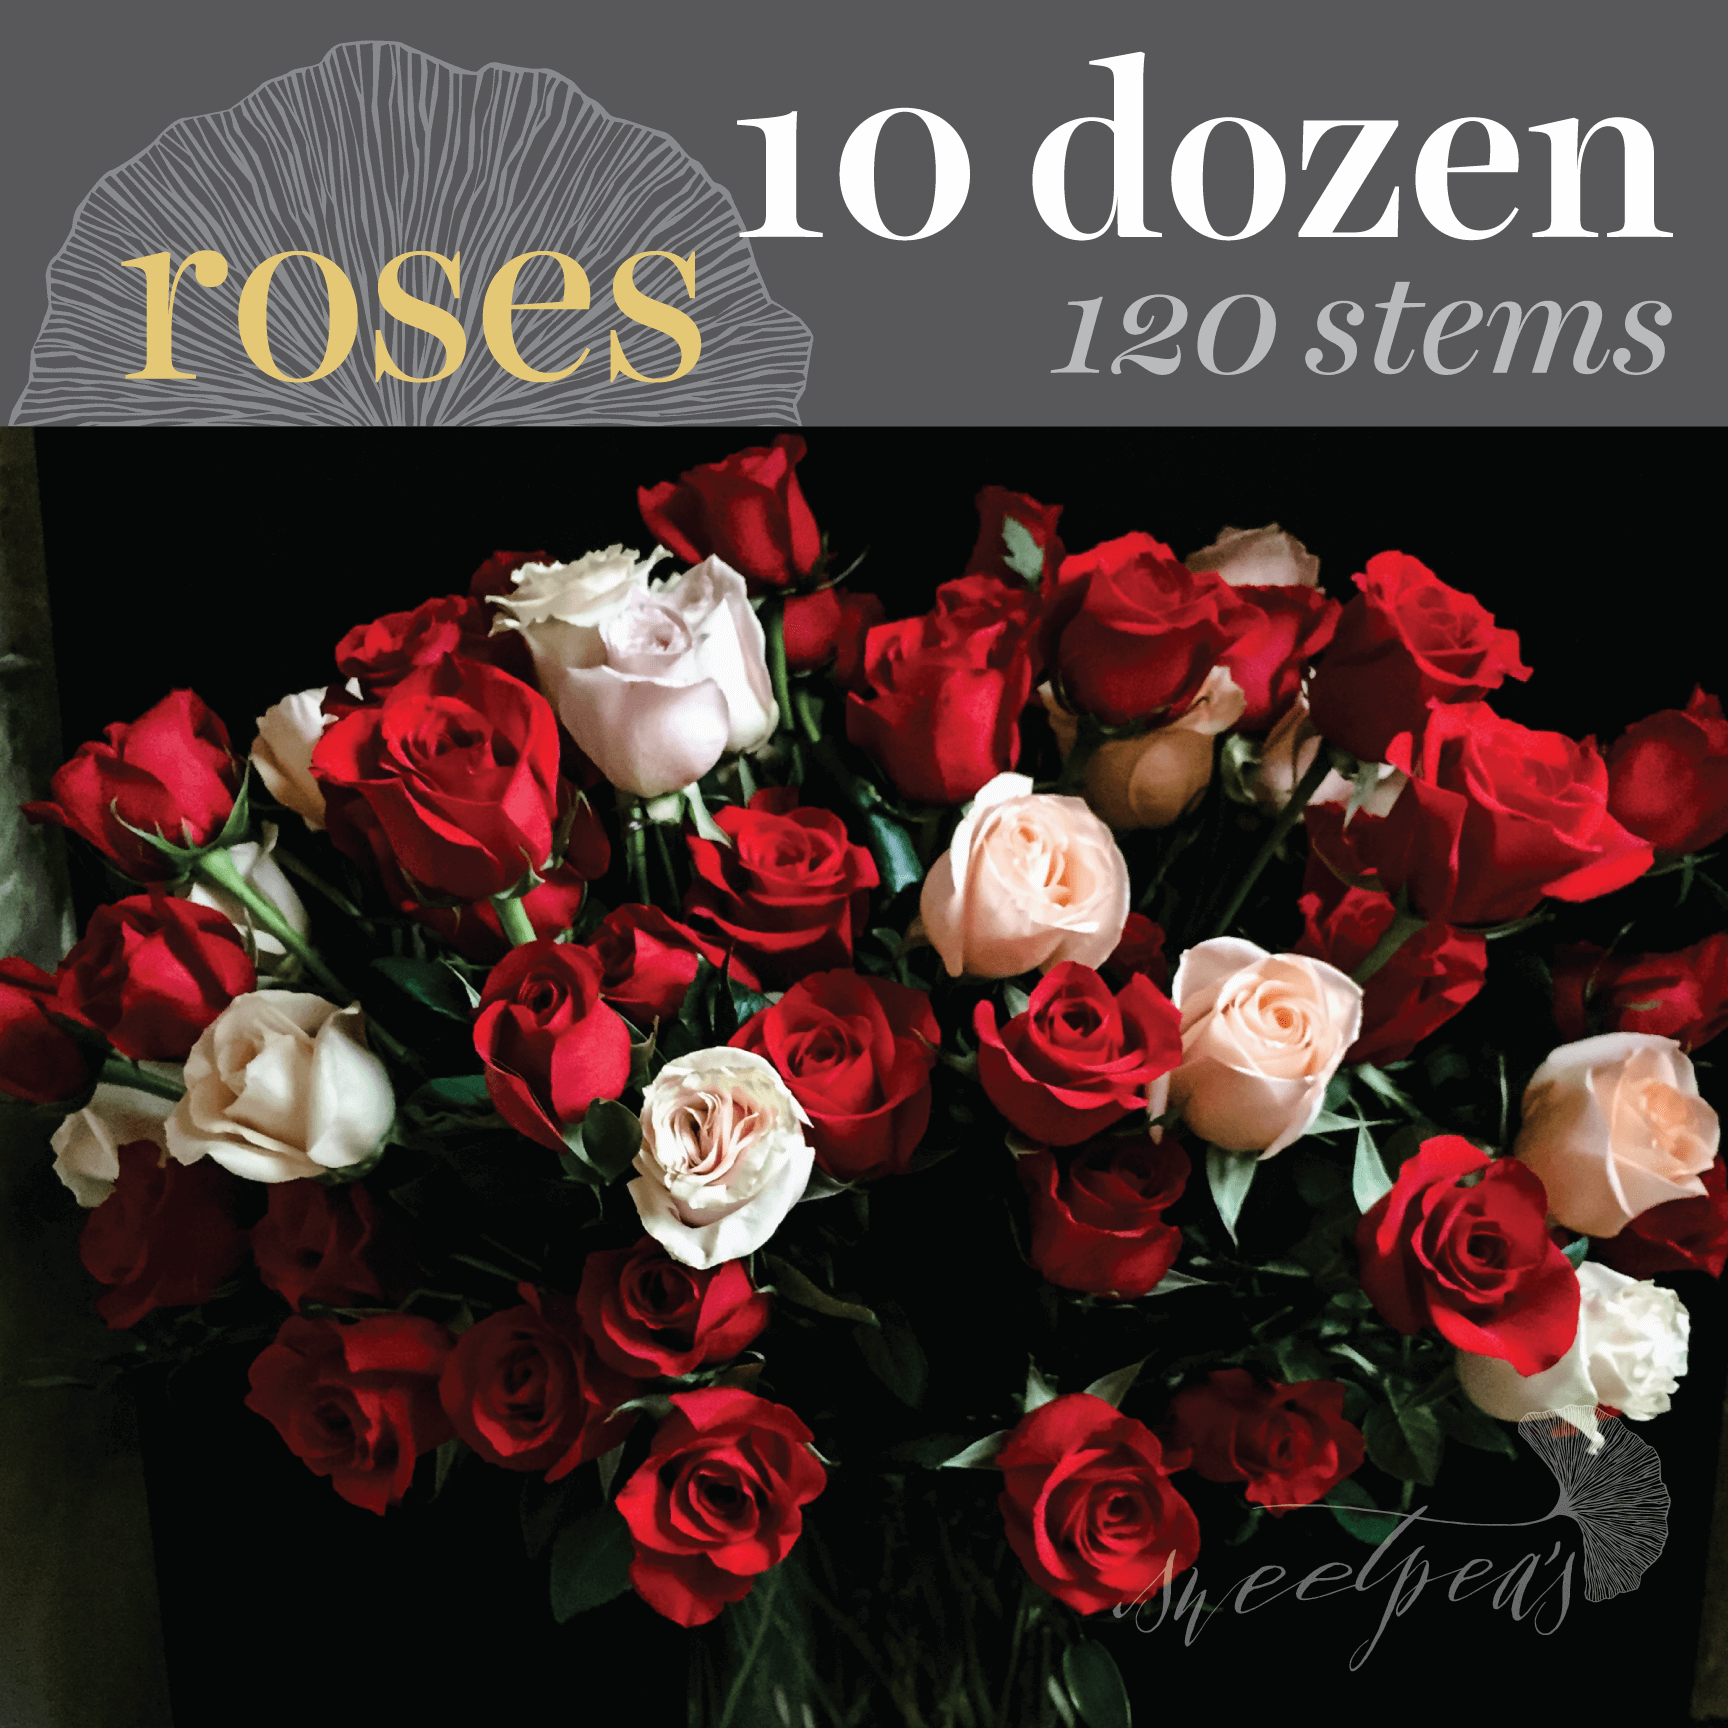 Toronto Flower Delivery - 10 Dozen (120 stems) Assorted Roses Bouquet |  Sweetpea's